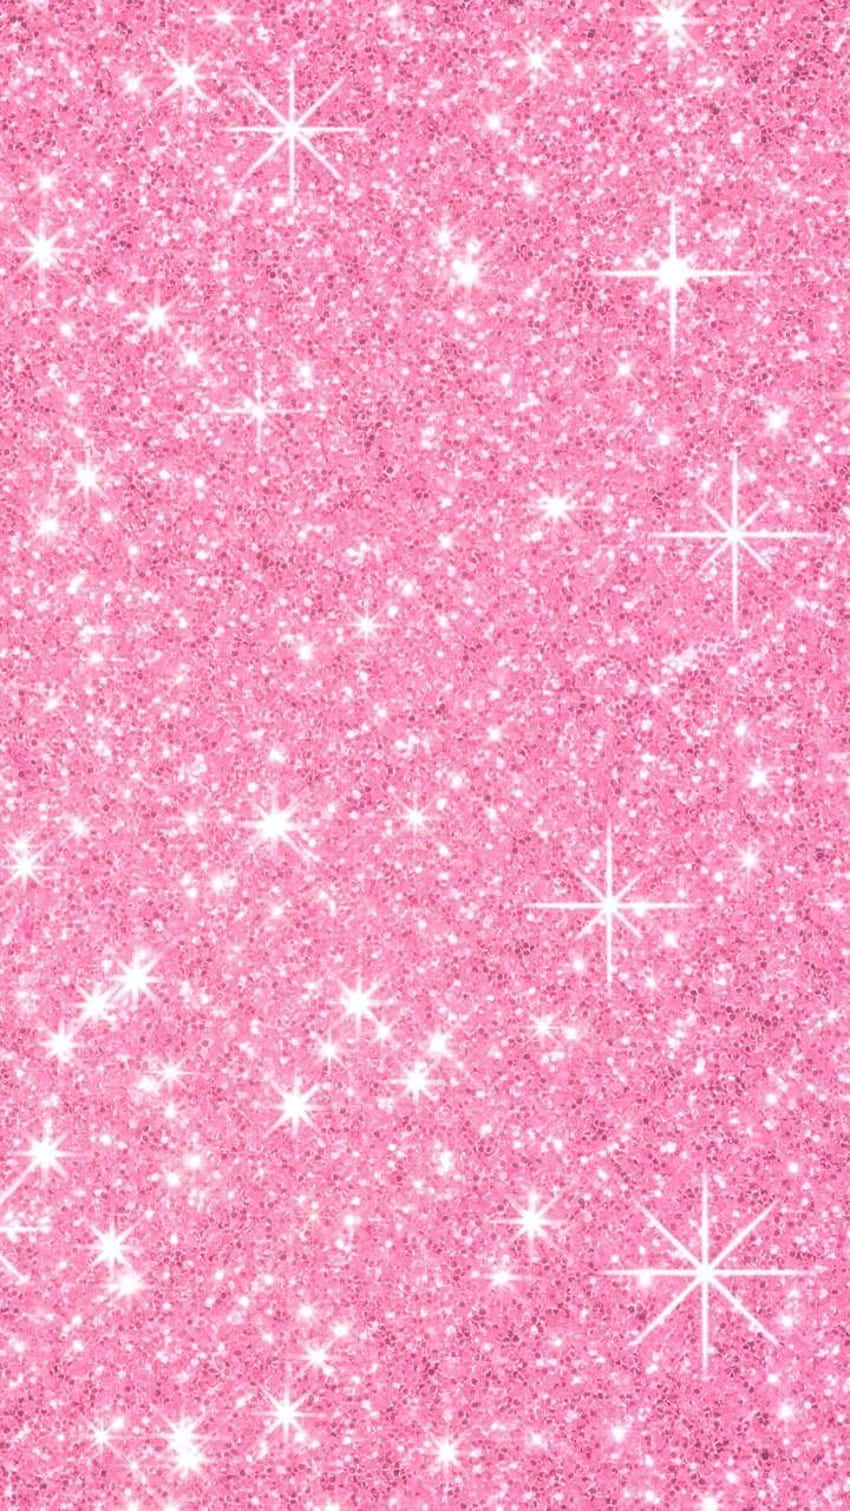 Create an eye-catching and vibrant atmosphere with this gorgeous pink sparkly background